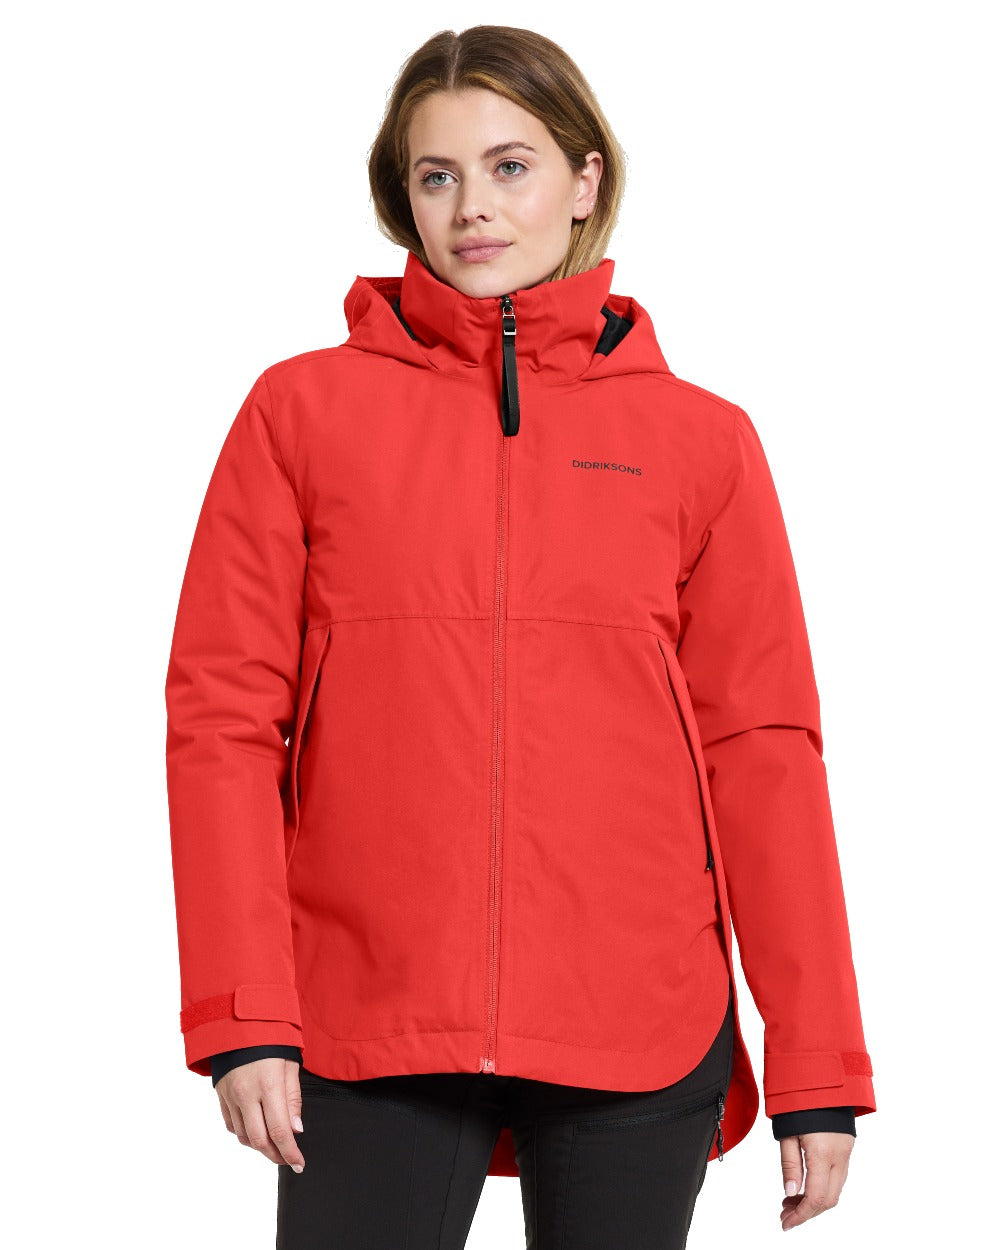 Didriksons Jennie Womens Jacket in Pomme Red 